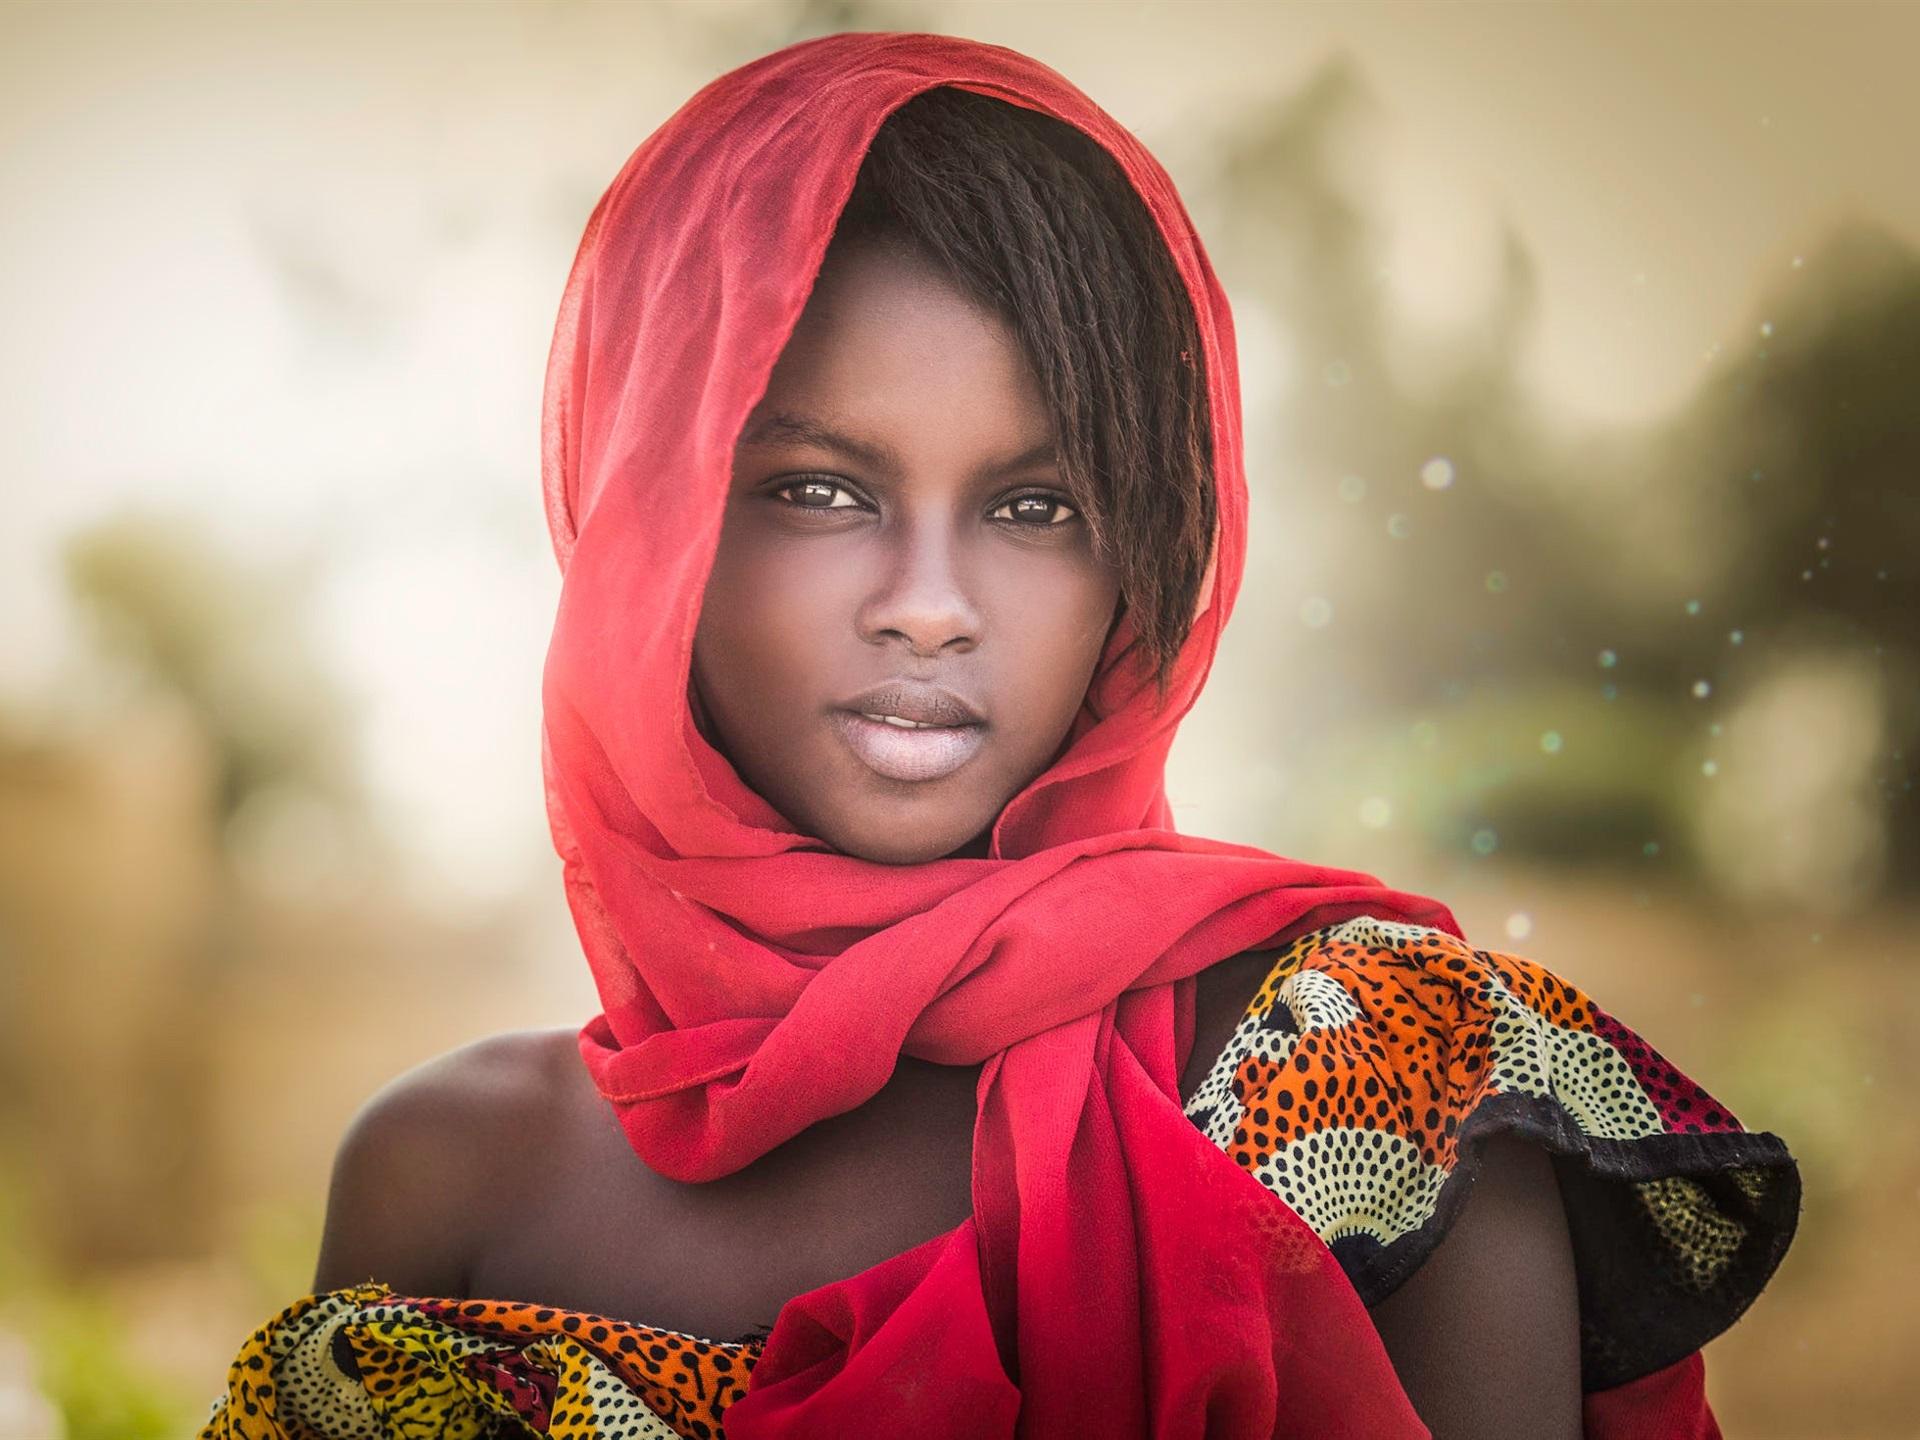 African Woman Wallpapers - Wallpaper Cave.